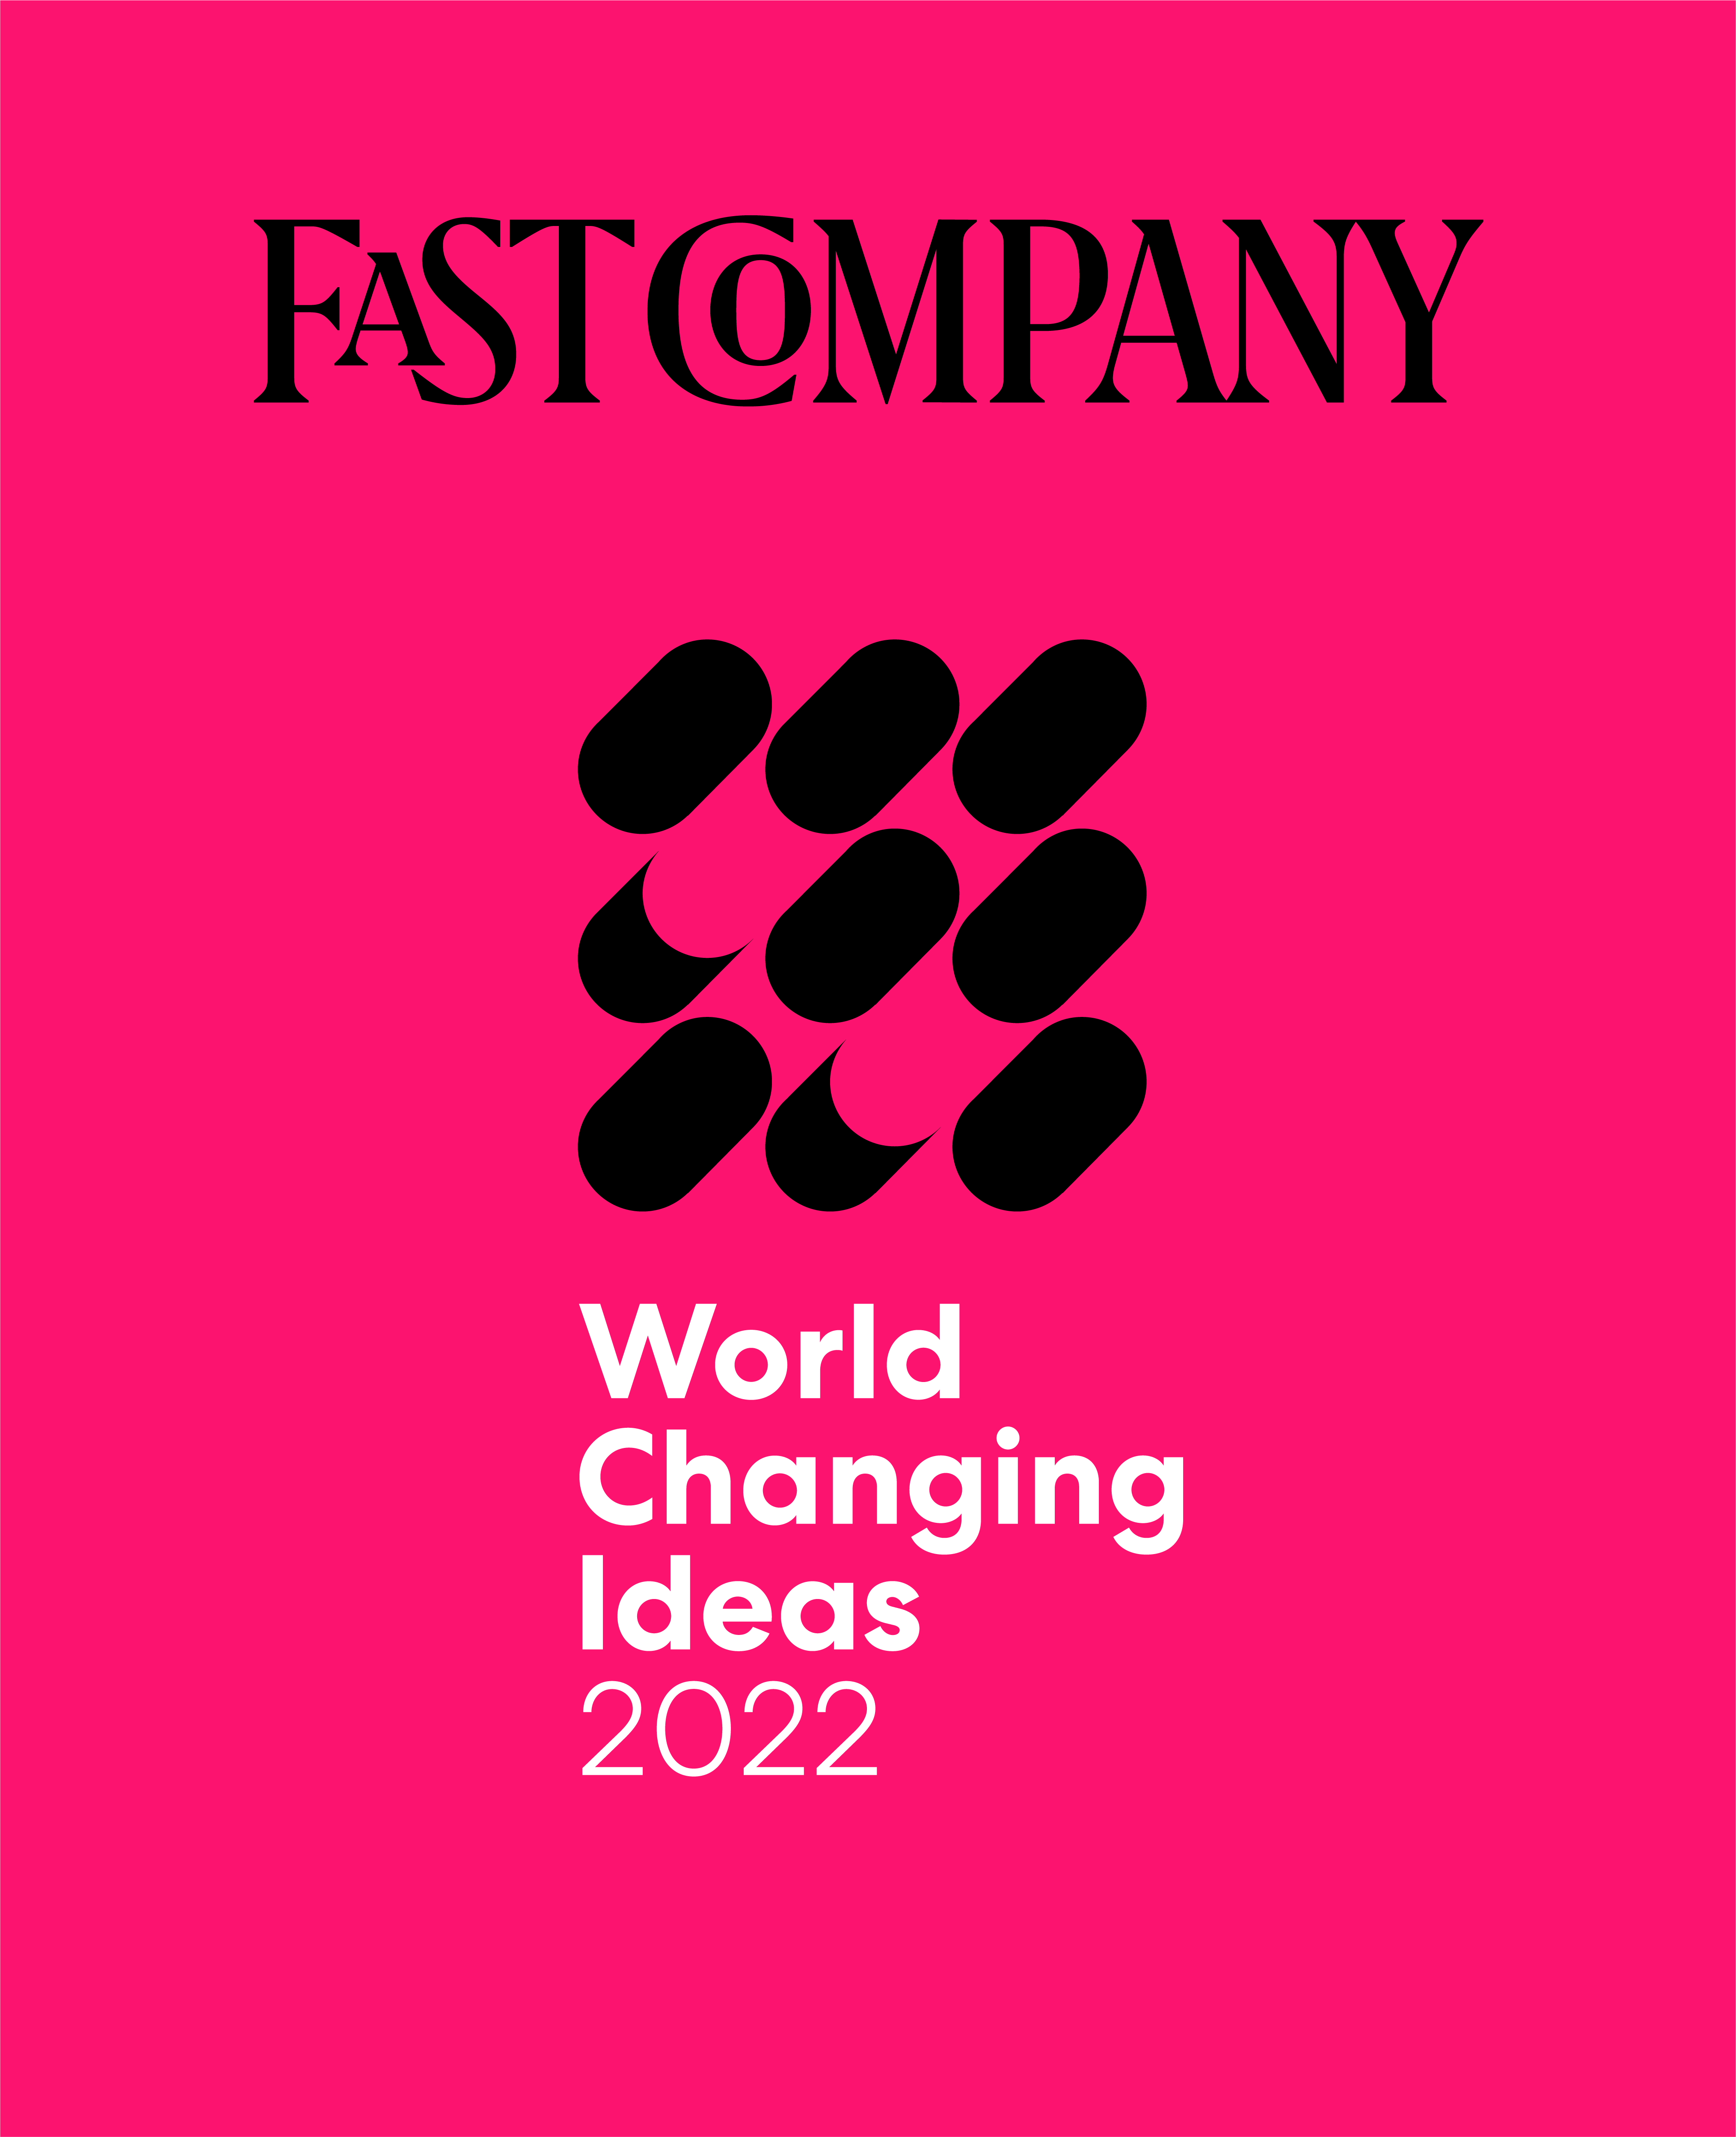 Fast Company World Changing Ideas Finalist in 2022